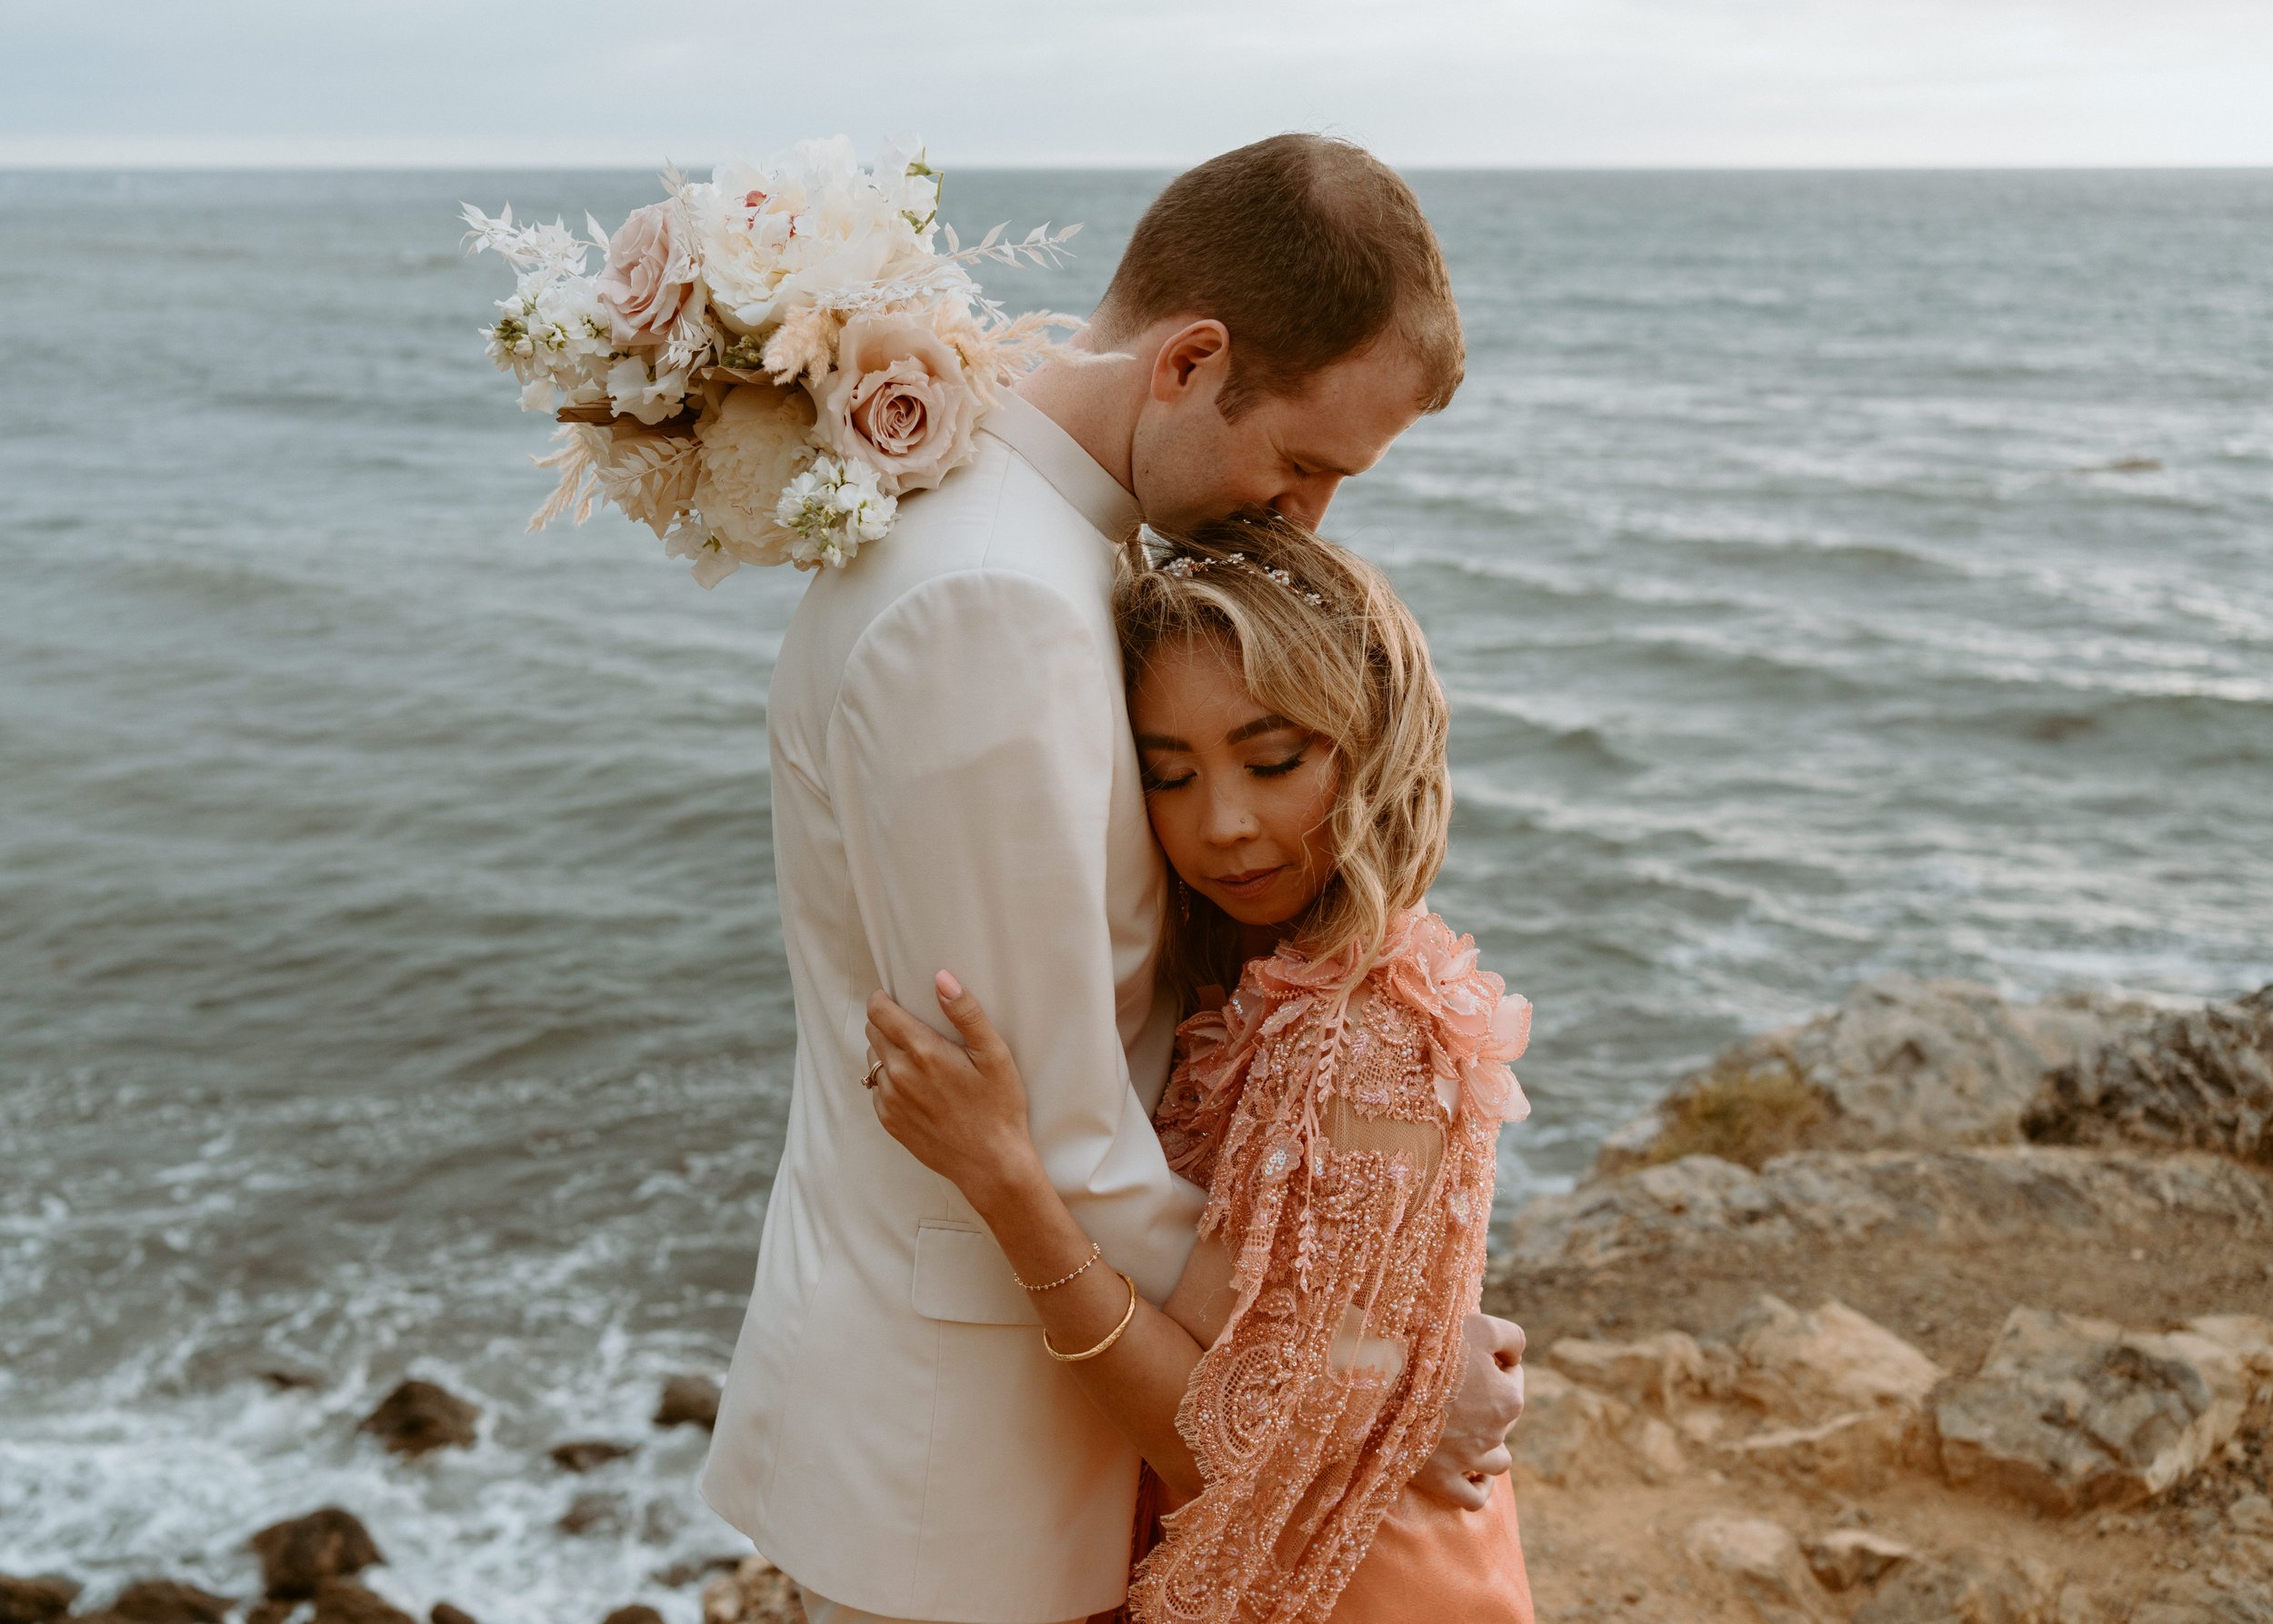 Destination Vow Renewal at Coastal Location | A guide to vow renewals from an elopement photographer